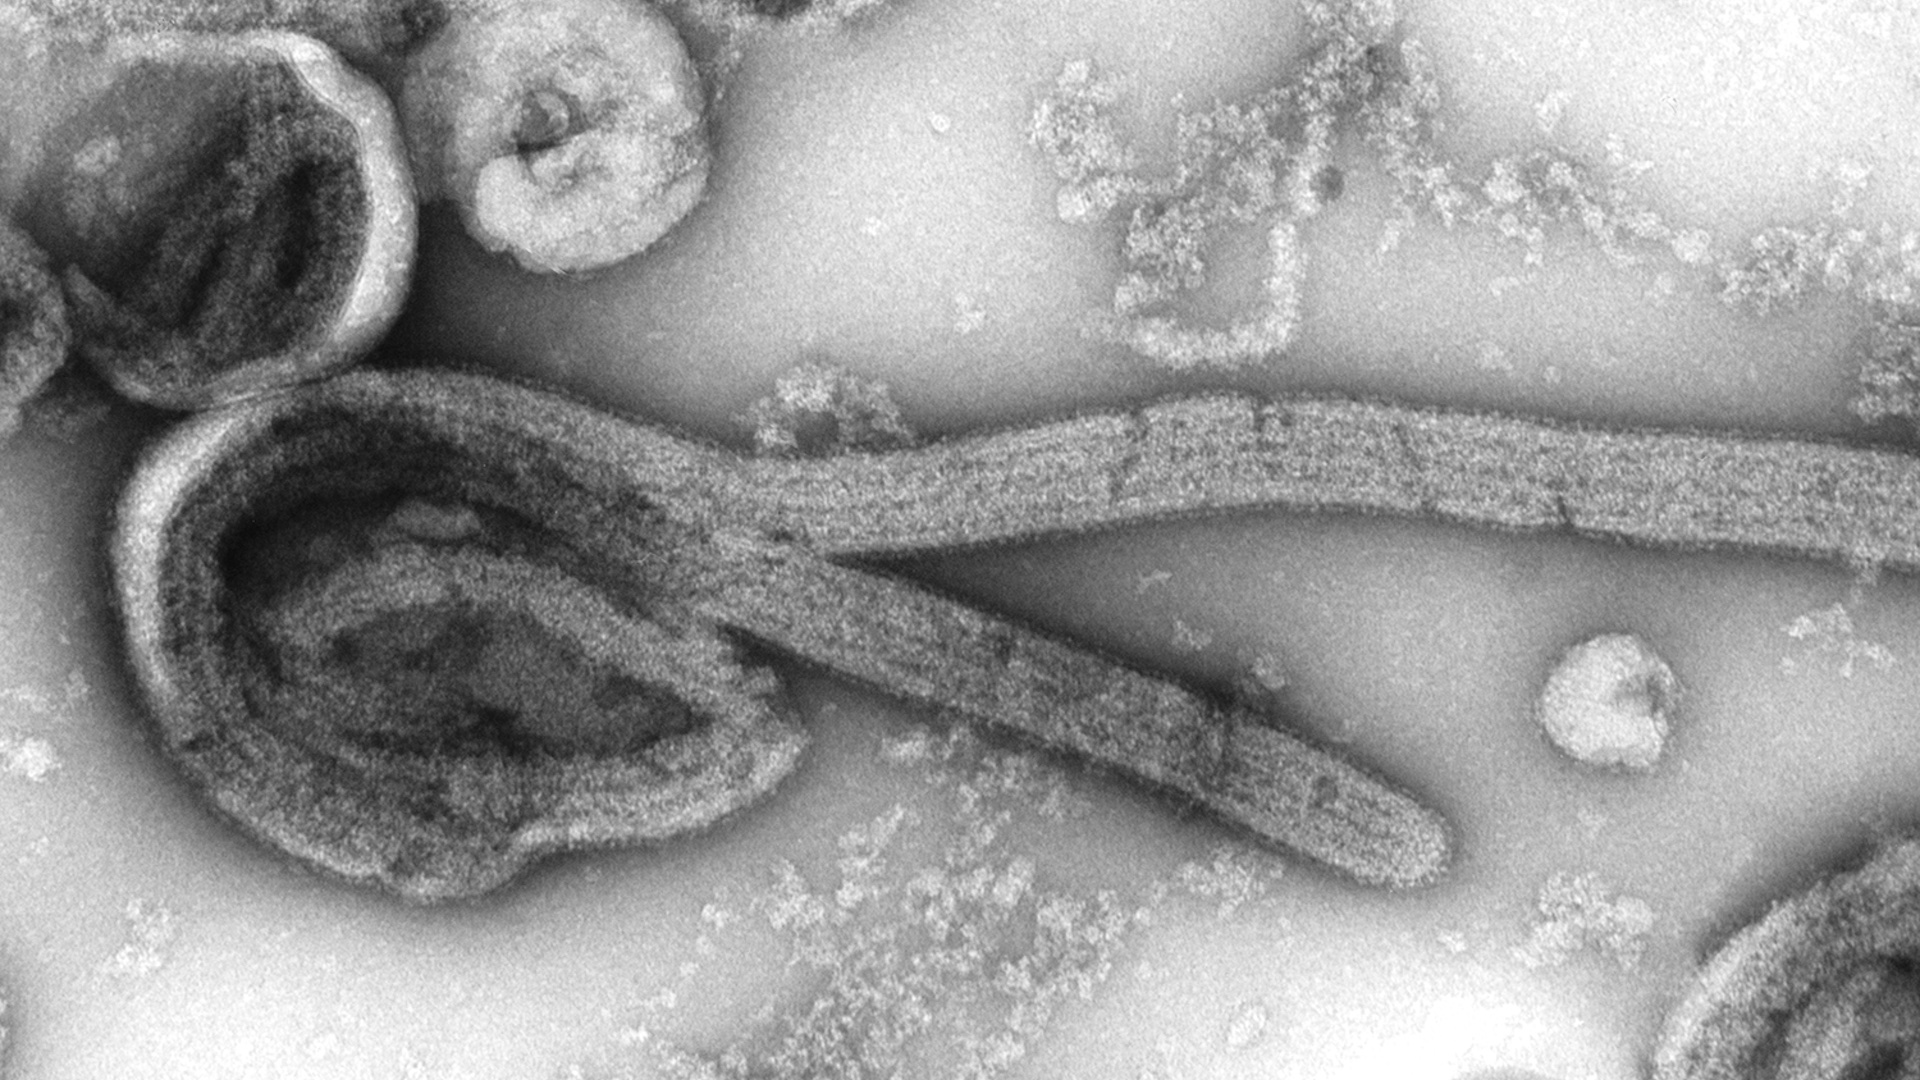 an electron microscopic image of an isolate of Ebola virus. The internal structures of the filamentous particle are visible, including the nucleocapsid and other structural viral proteins, and the outer viral envelope is covered with surface projections.